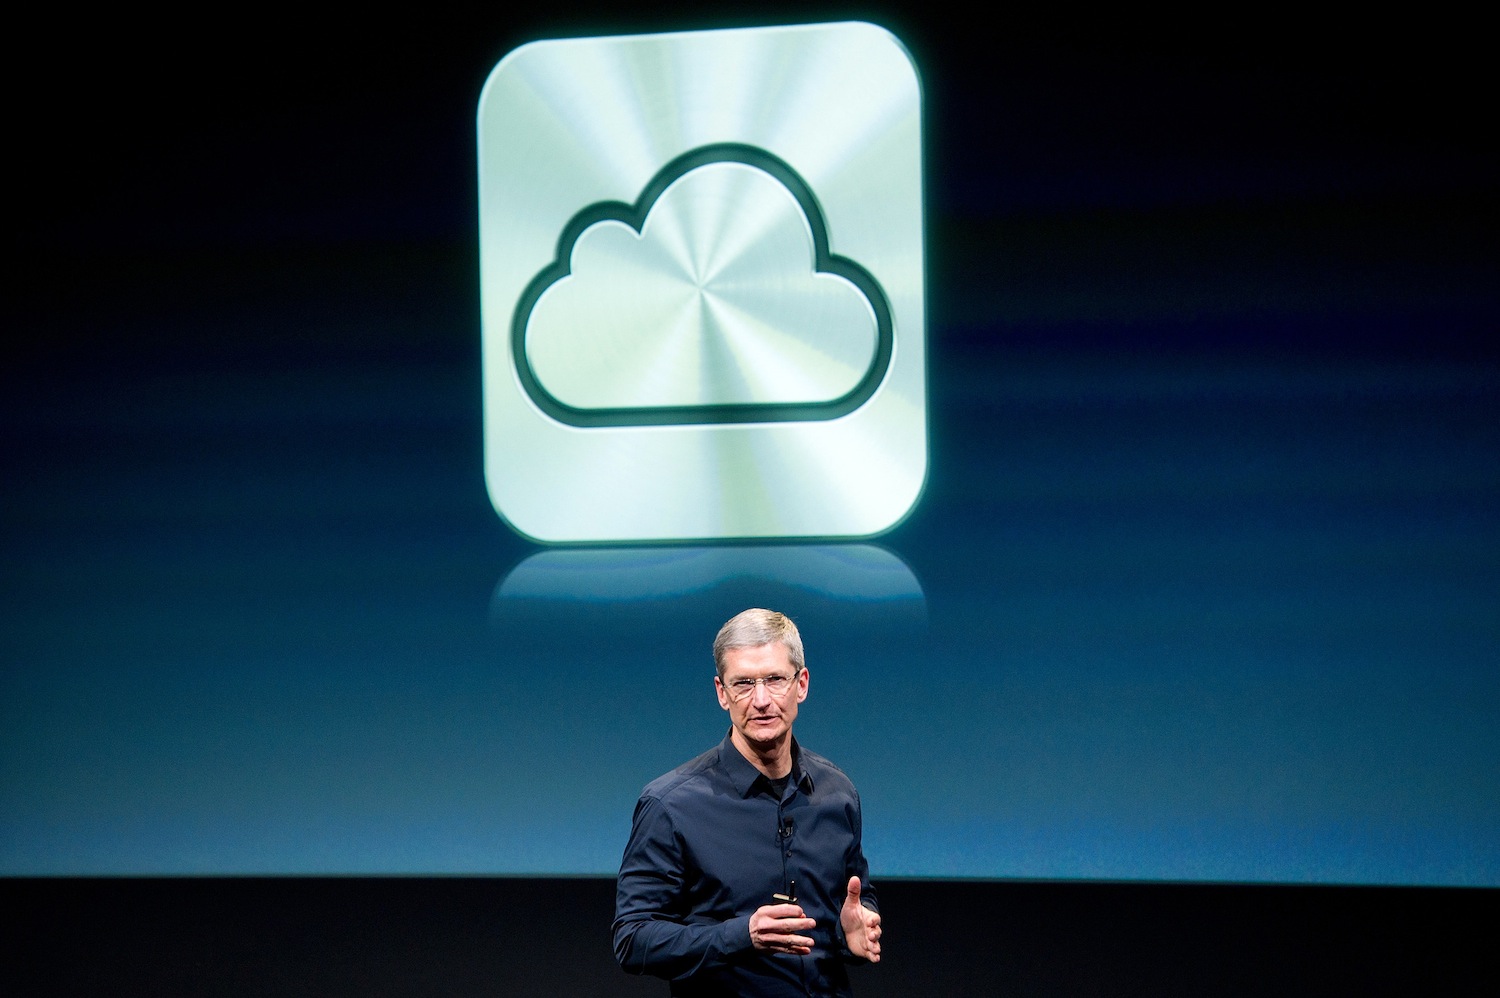 Apple CEO Tim Cook speaks during an event at the company's headquarters in Cupertino, California on Tuesday, Oct. 4, 2011. (David Paul Morris&mdash;Bloomberg / Getty Images)